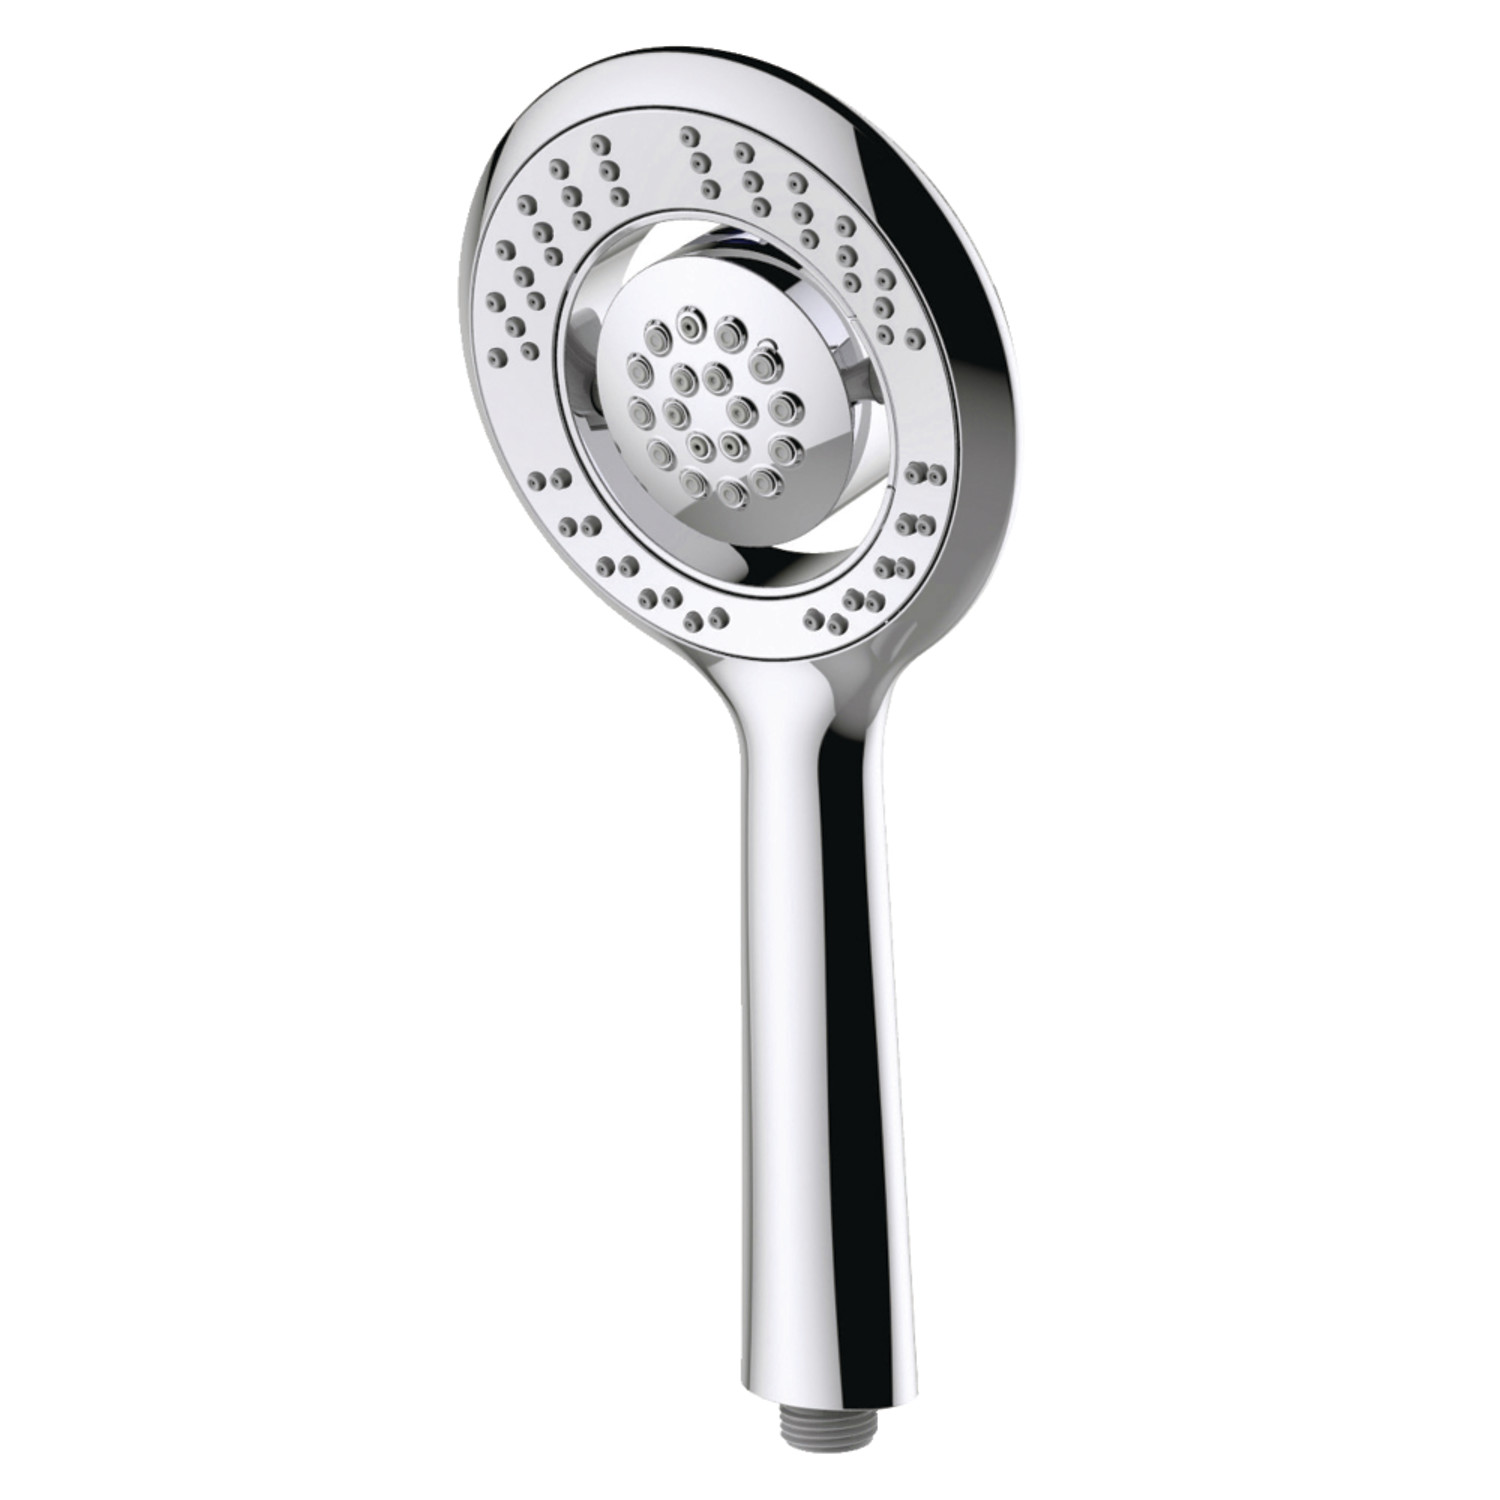 Kingston Brass KXH441A1 Shower Scape 4-Function Hand Shower, Polished Chrome - image 1 of 2